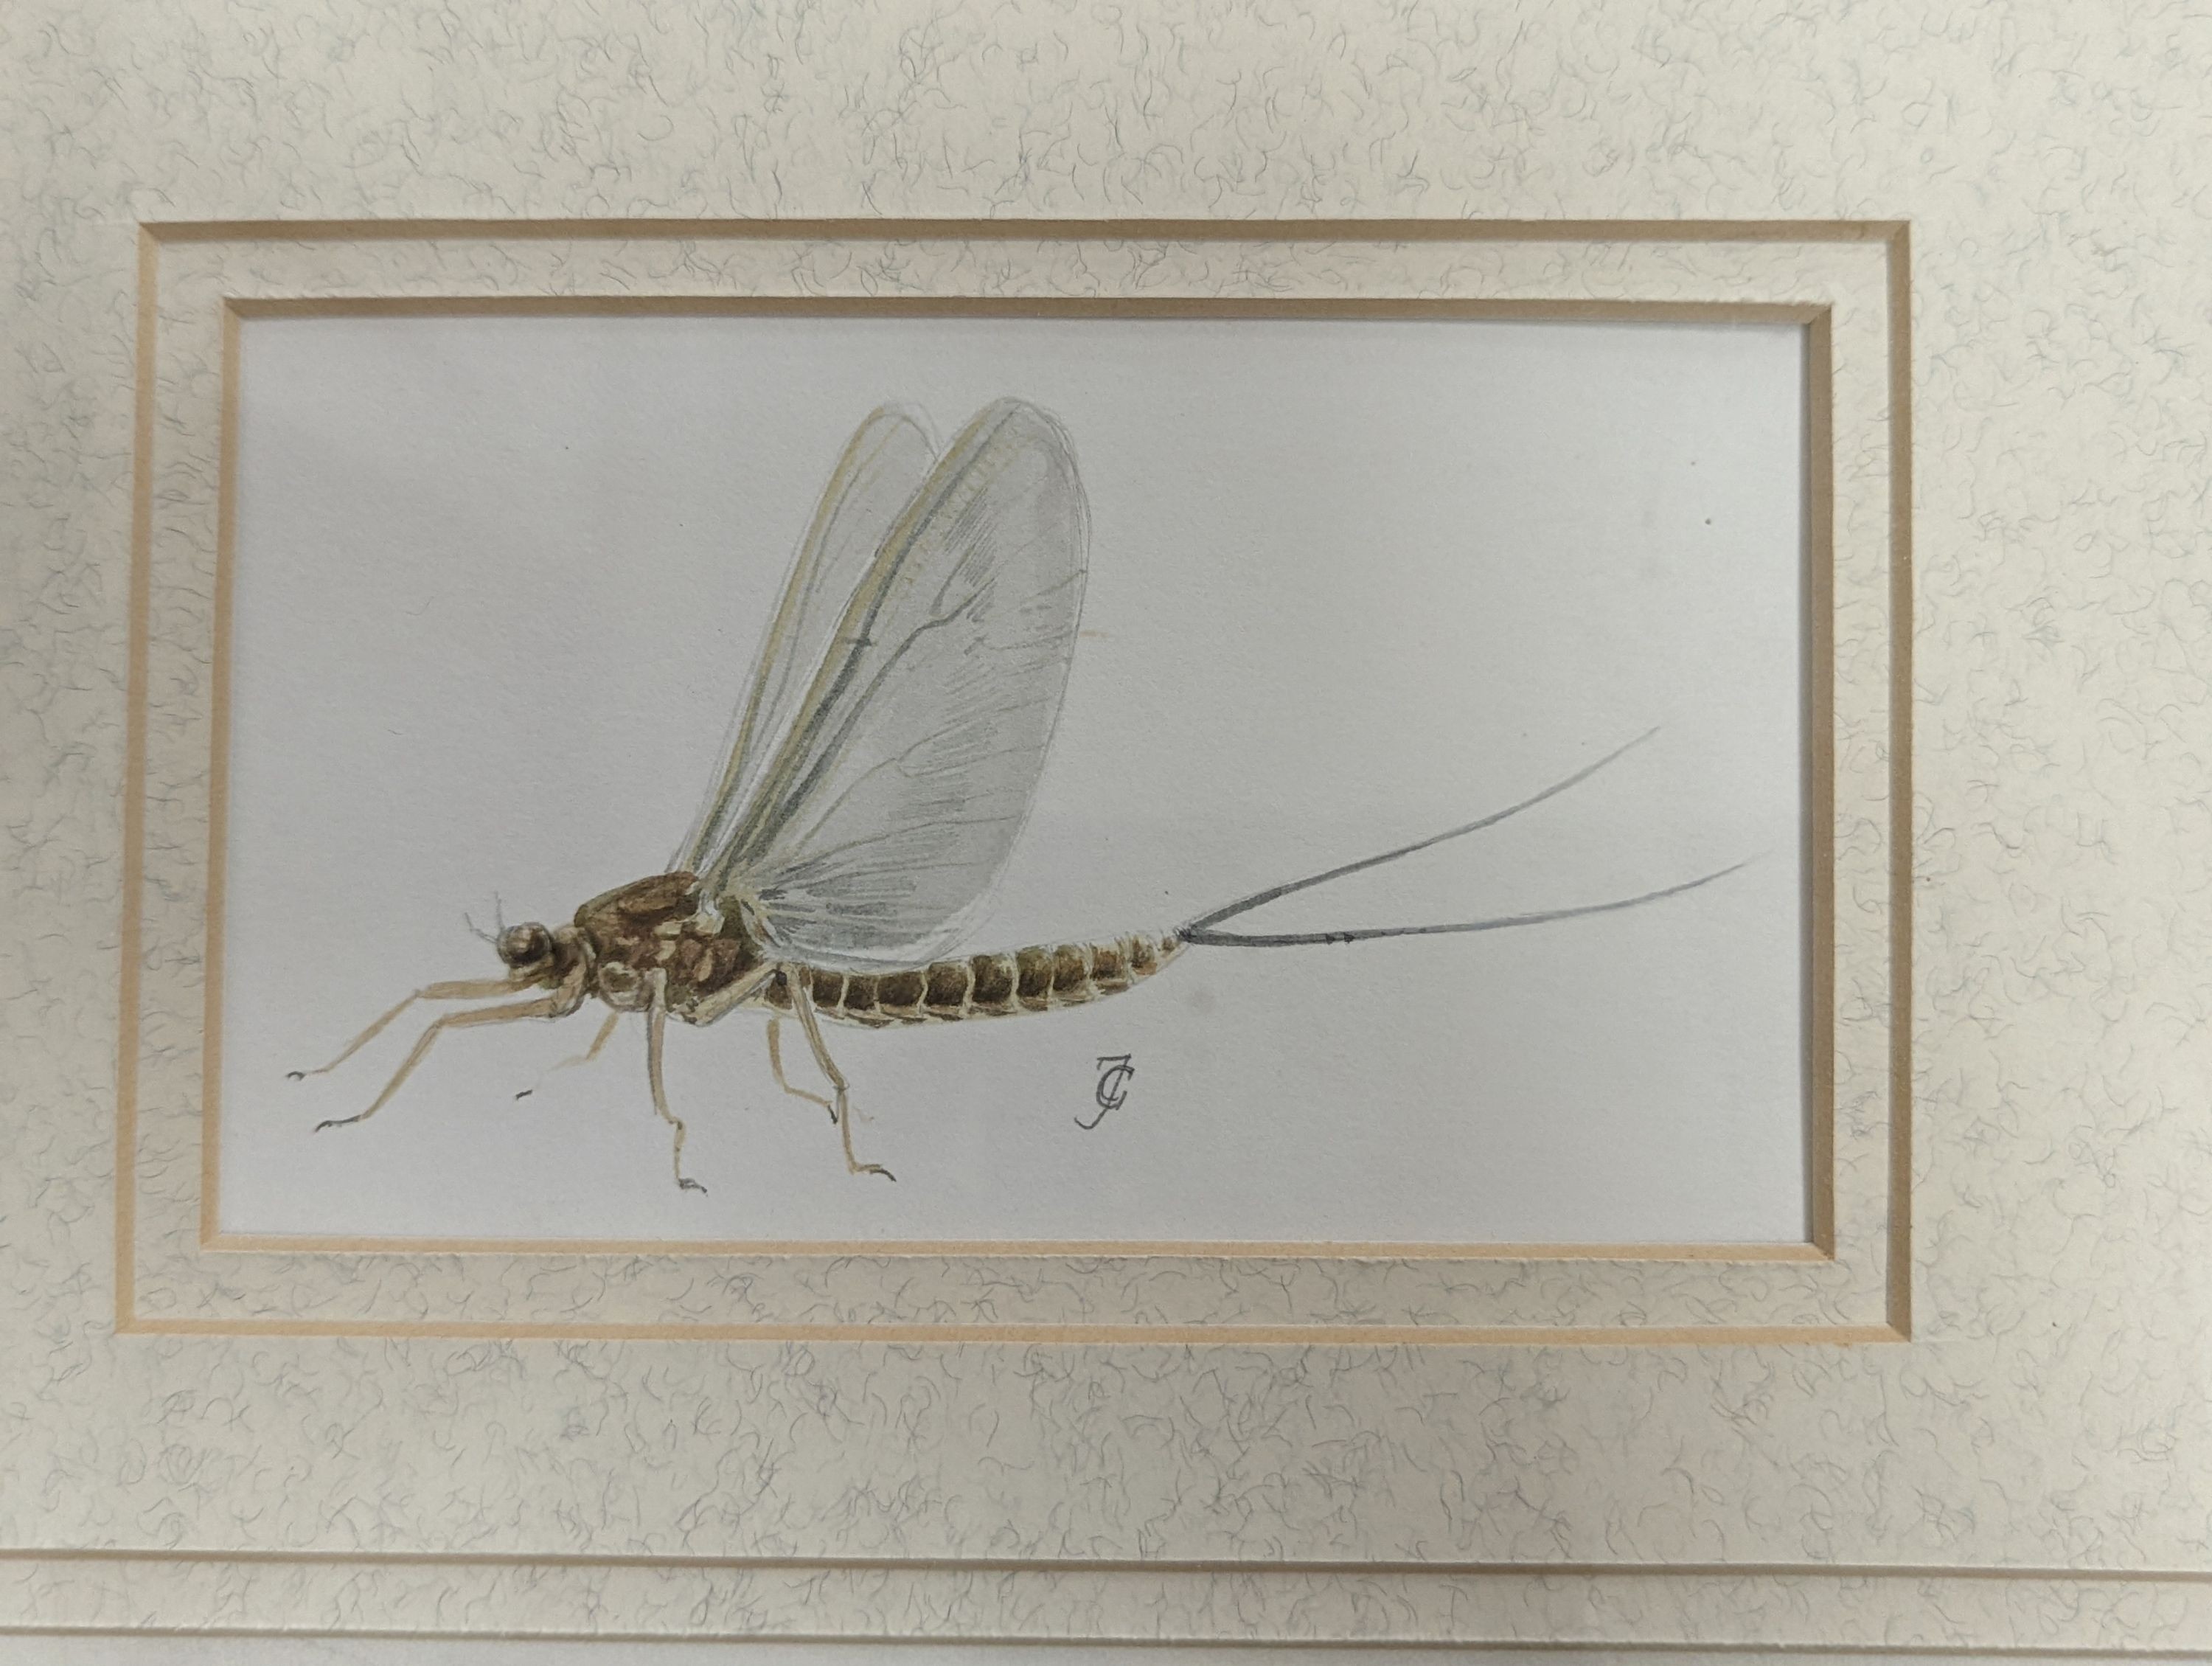 Charles Jardine, pencil and watercolour, Studies of a trout and mayflies, signed, largest 15 x 24cm, framed as one